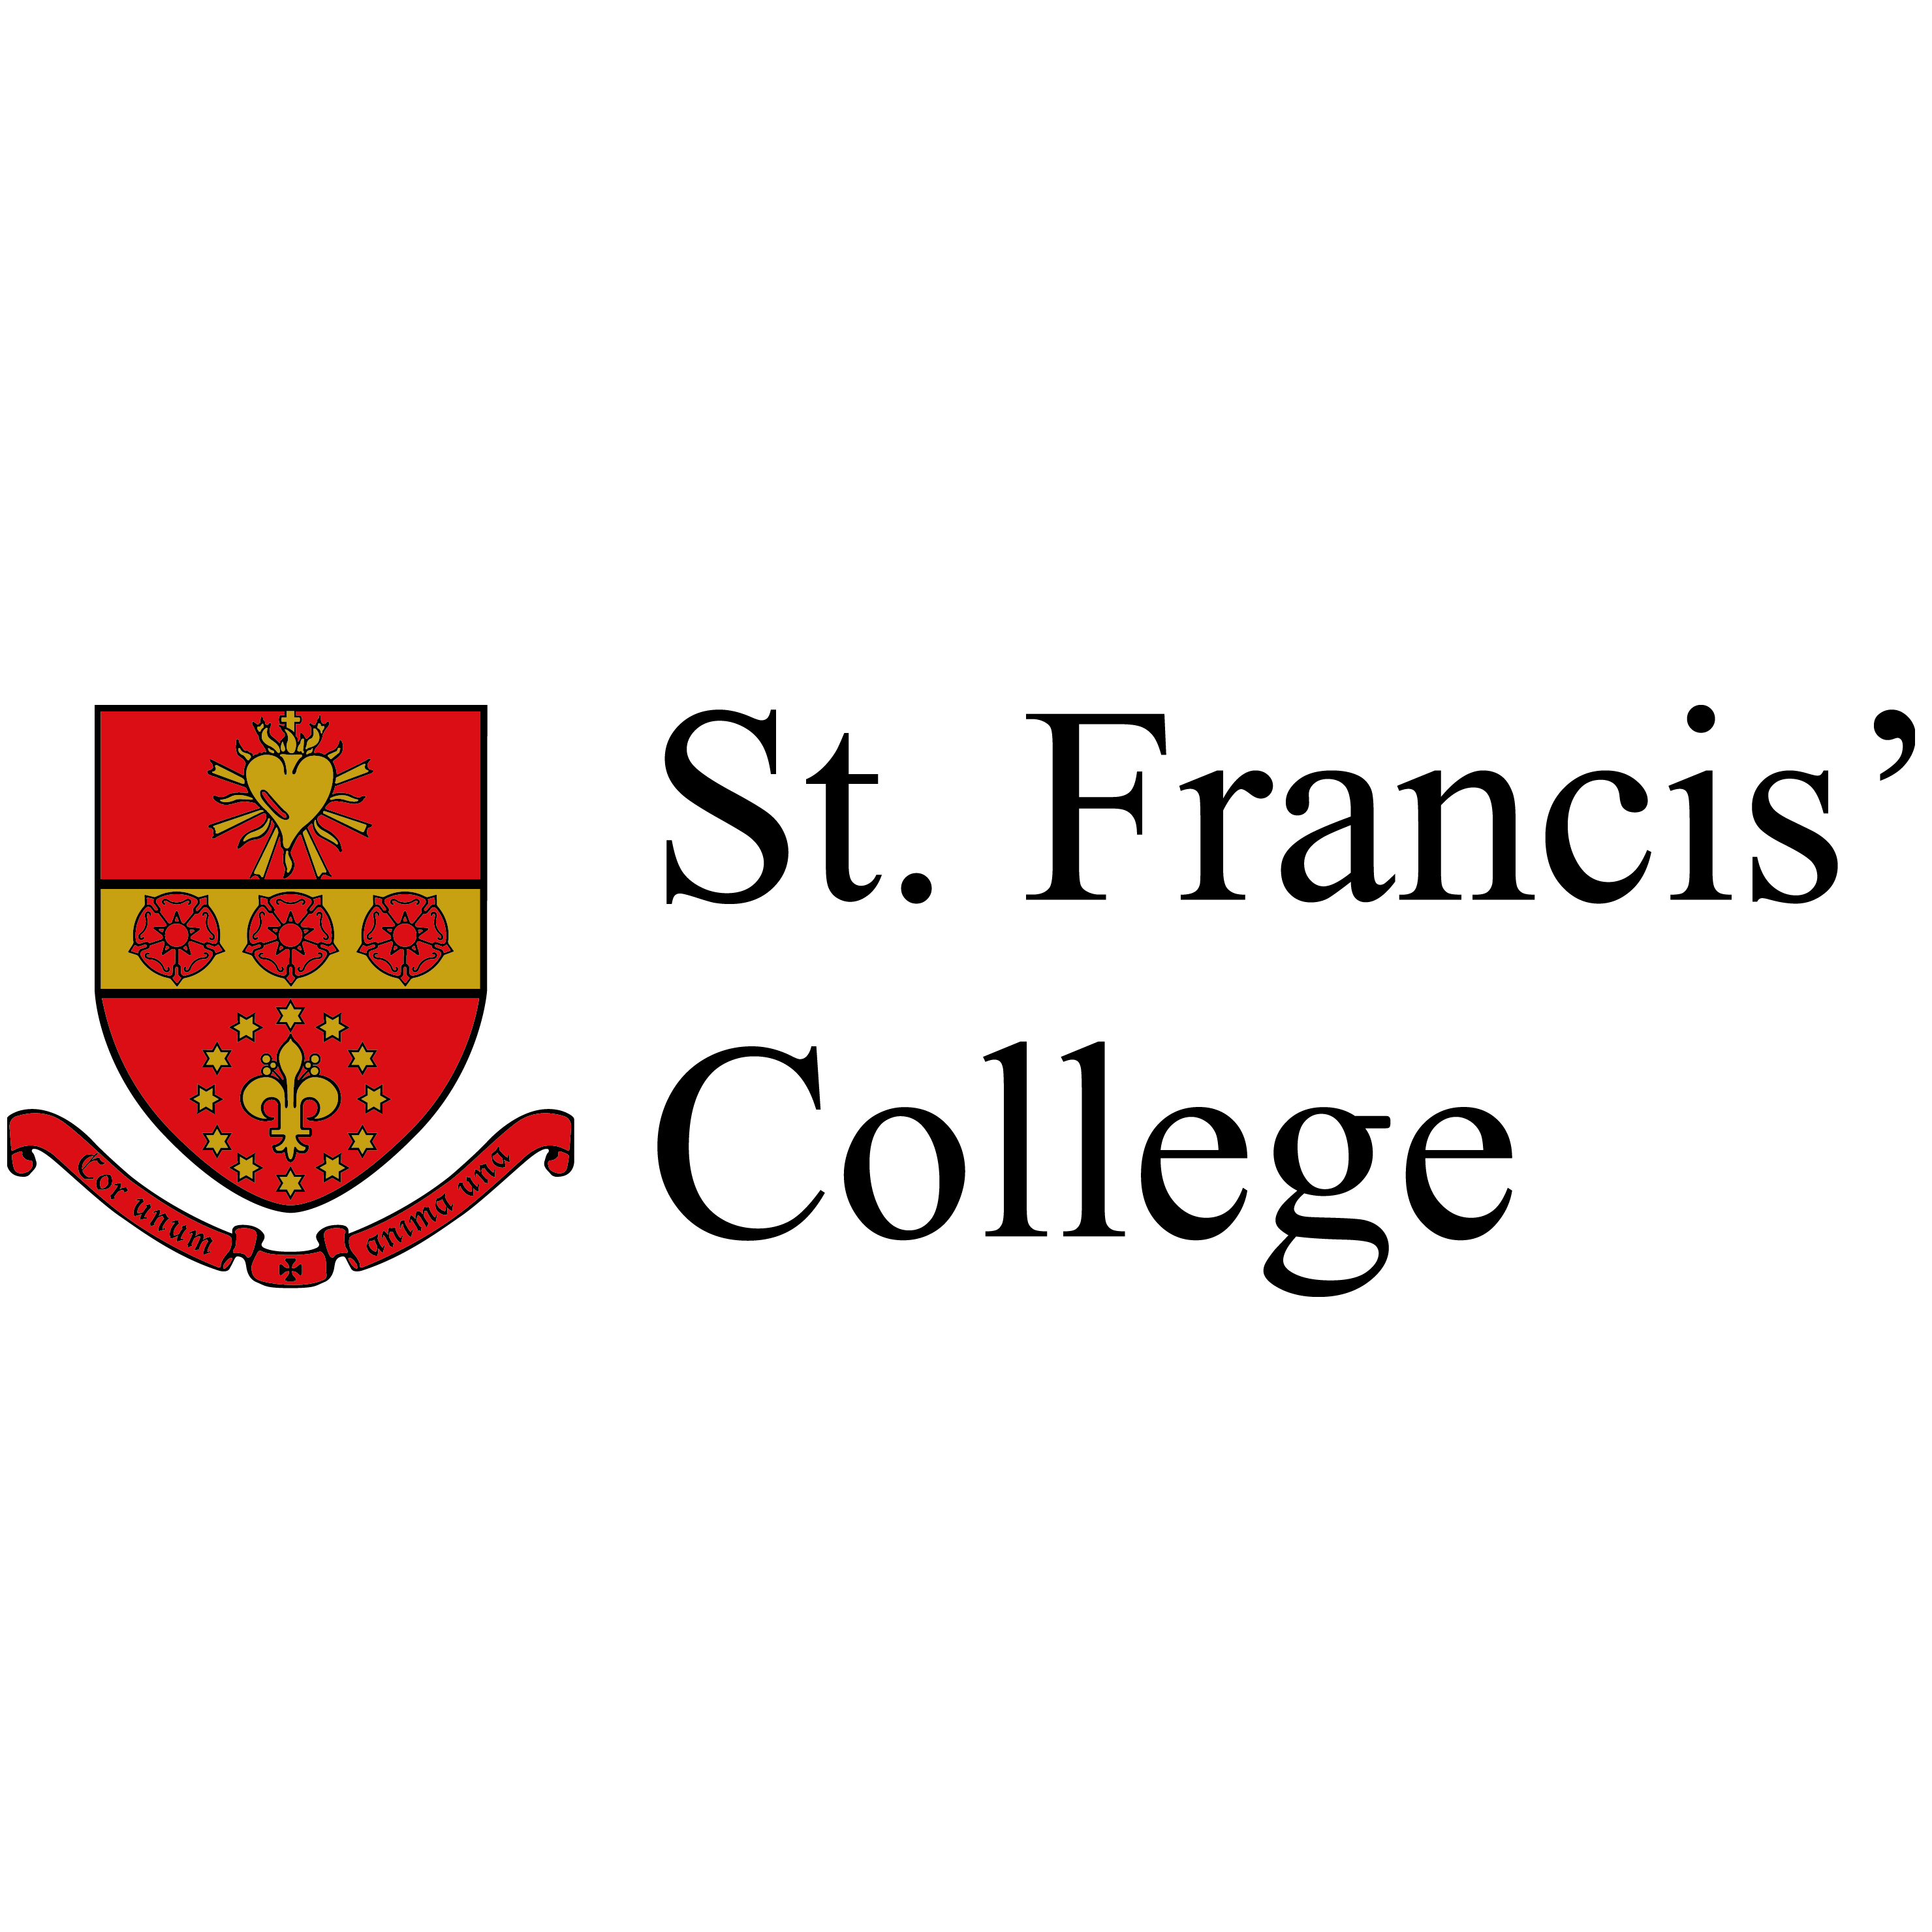 St. Francis' College (B.S.)